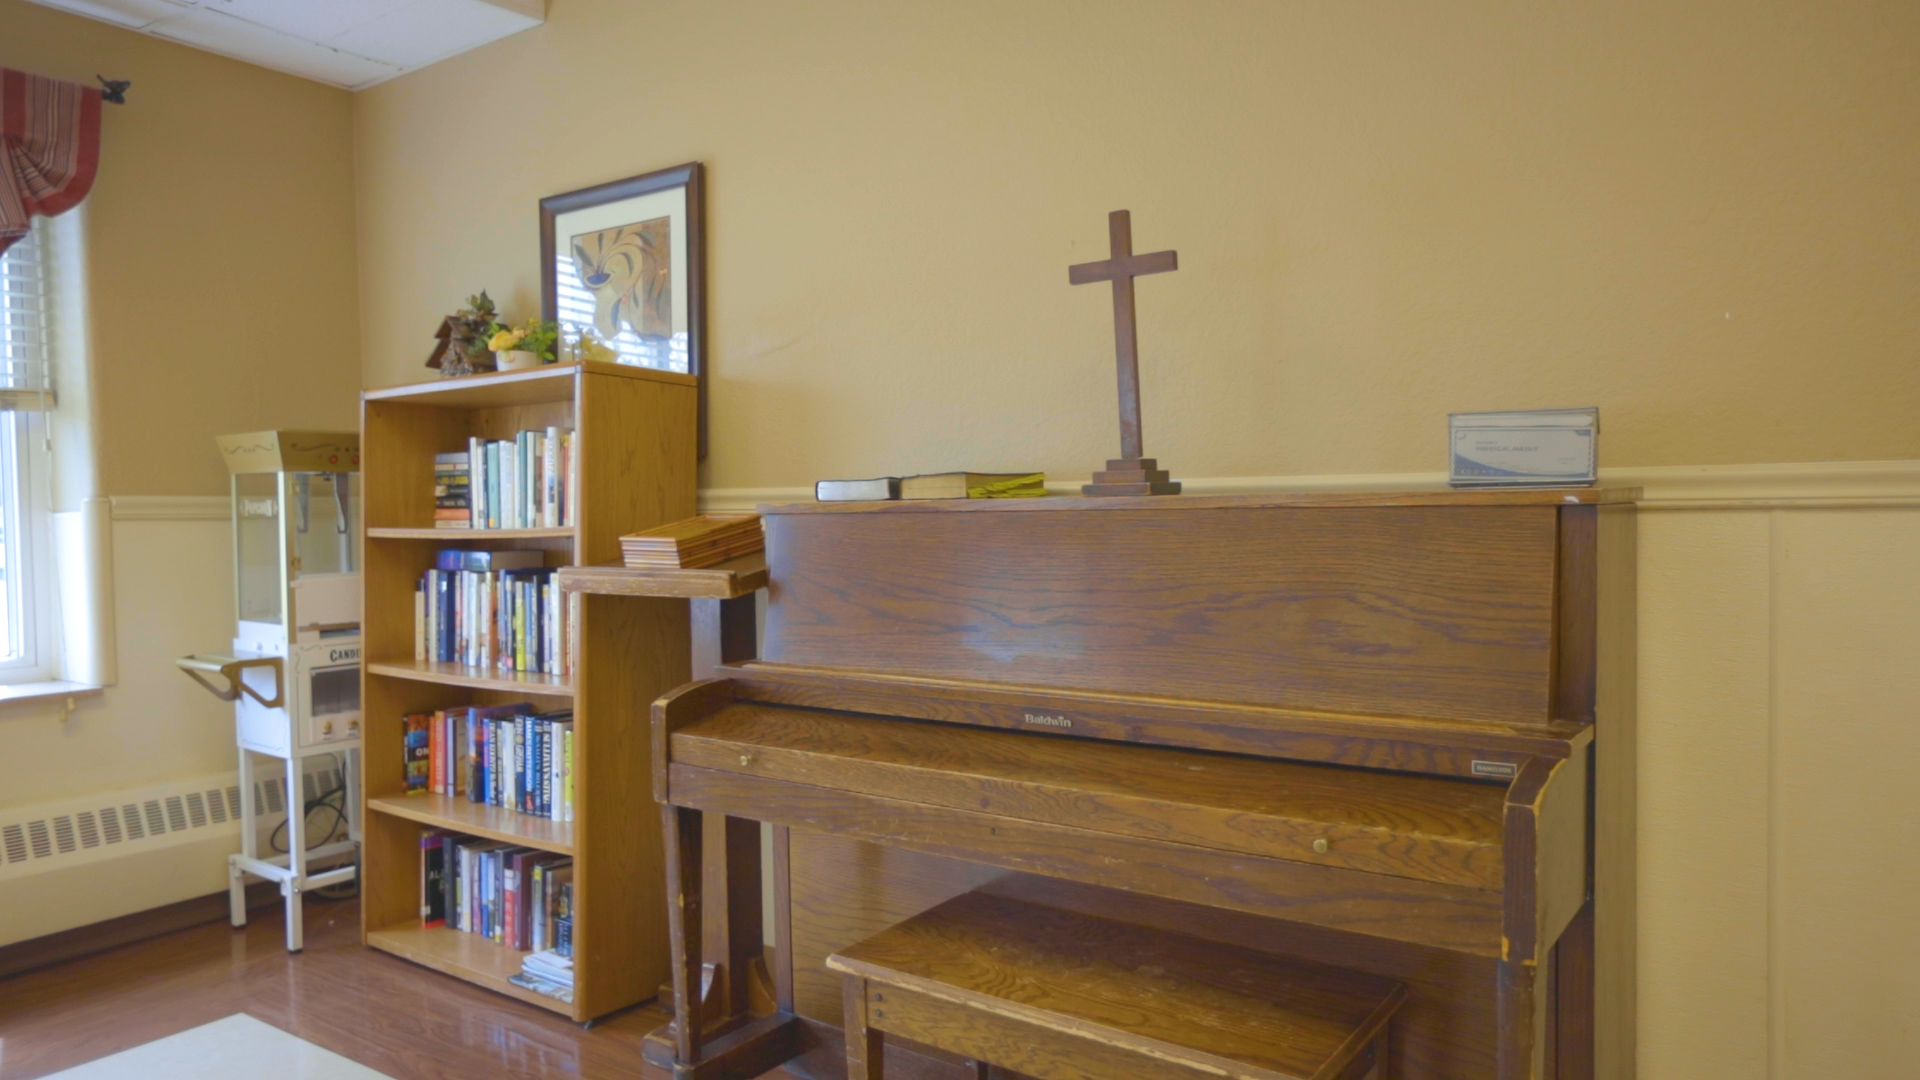 Piano with cross on top and book shelf on the side.